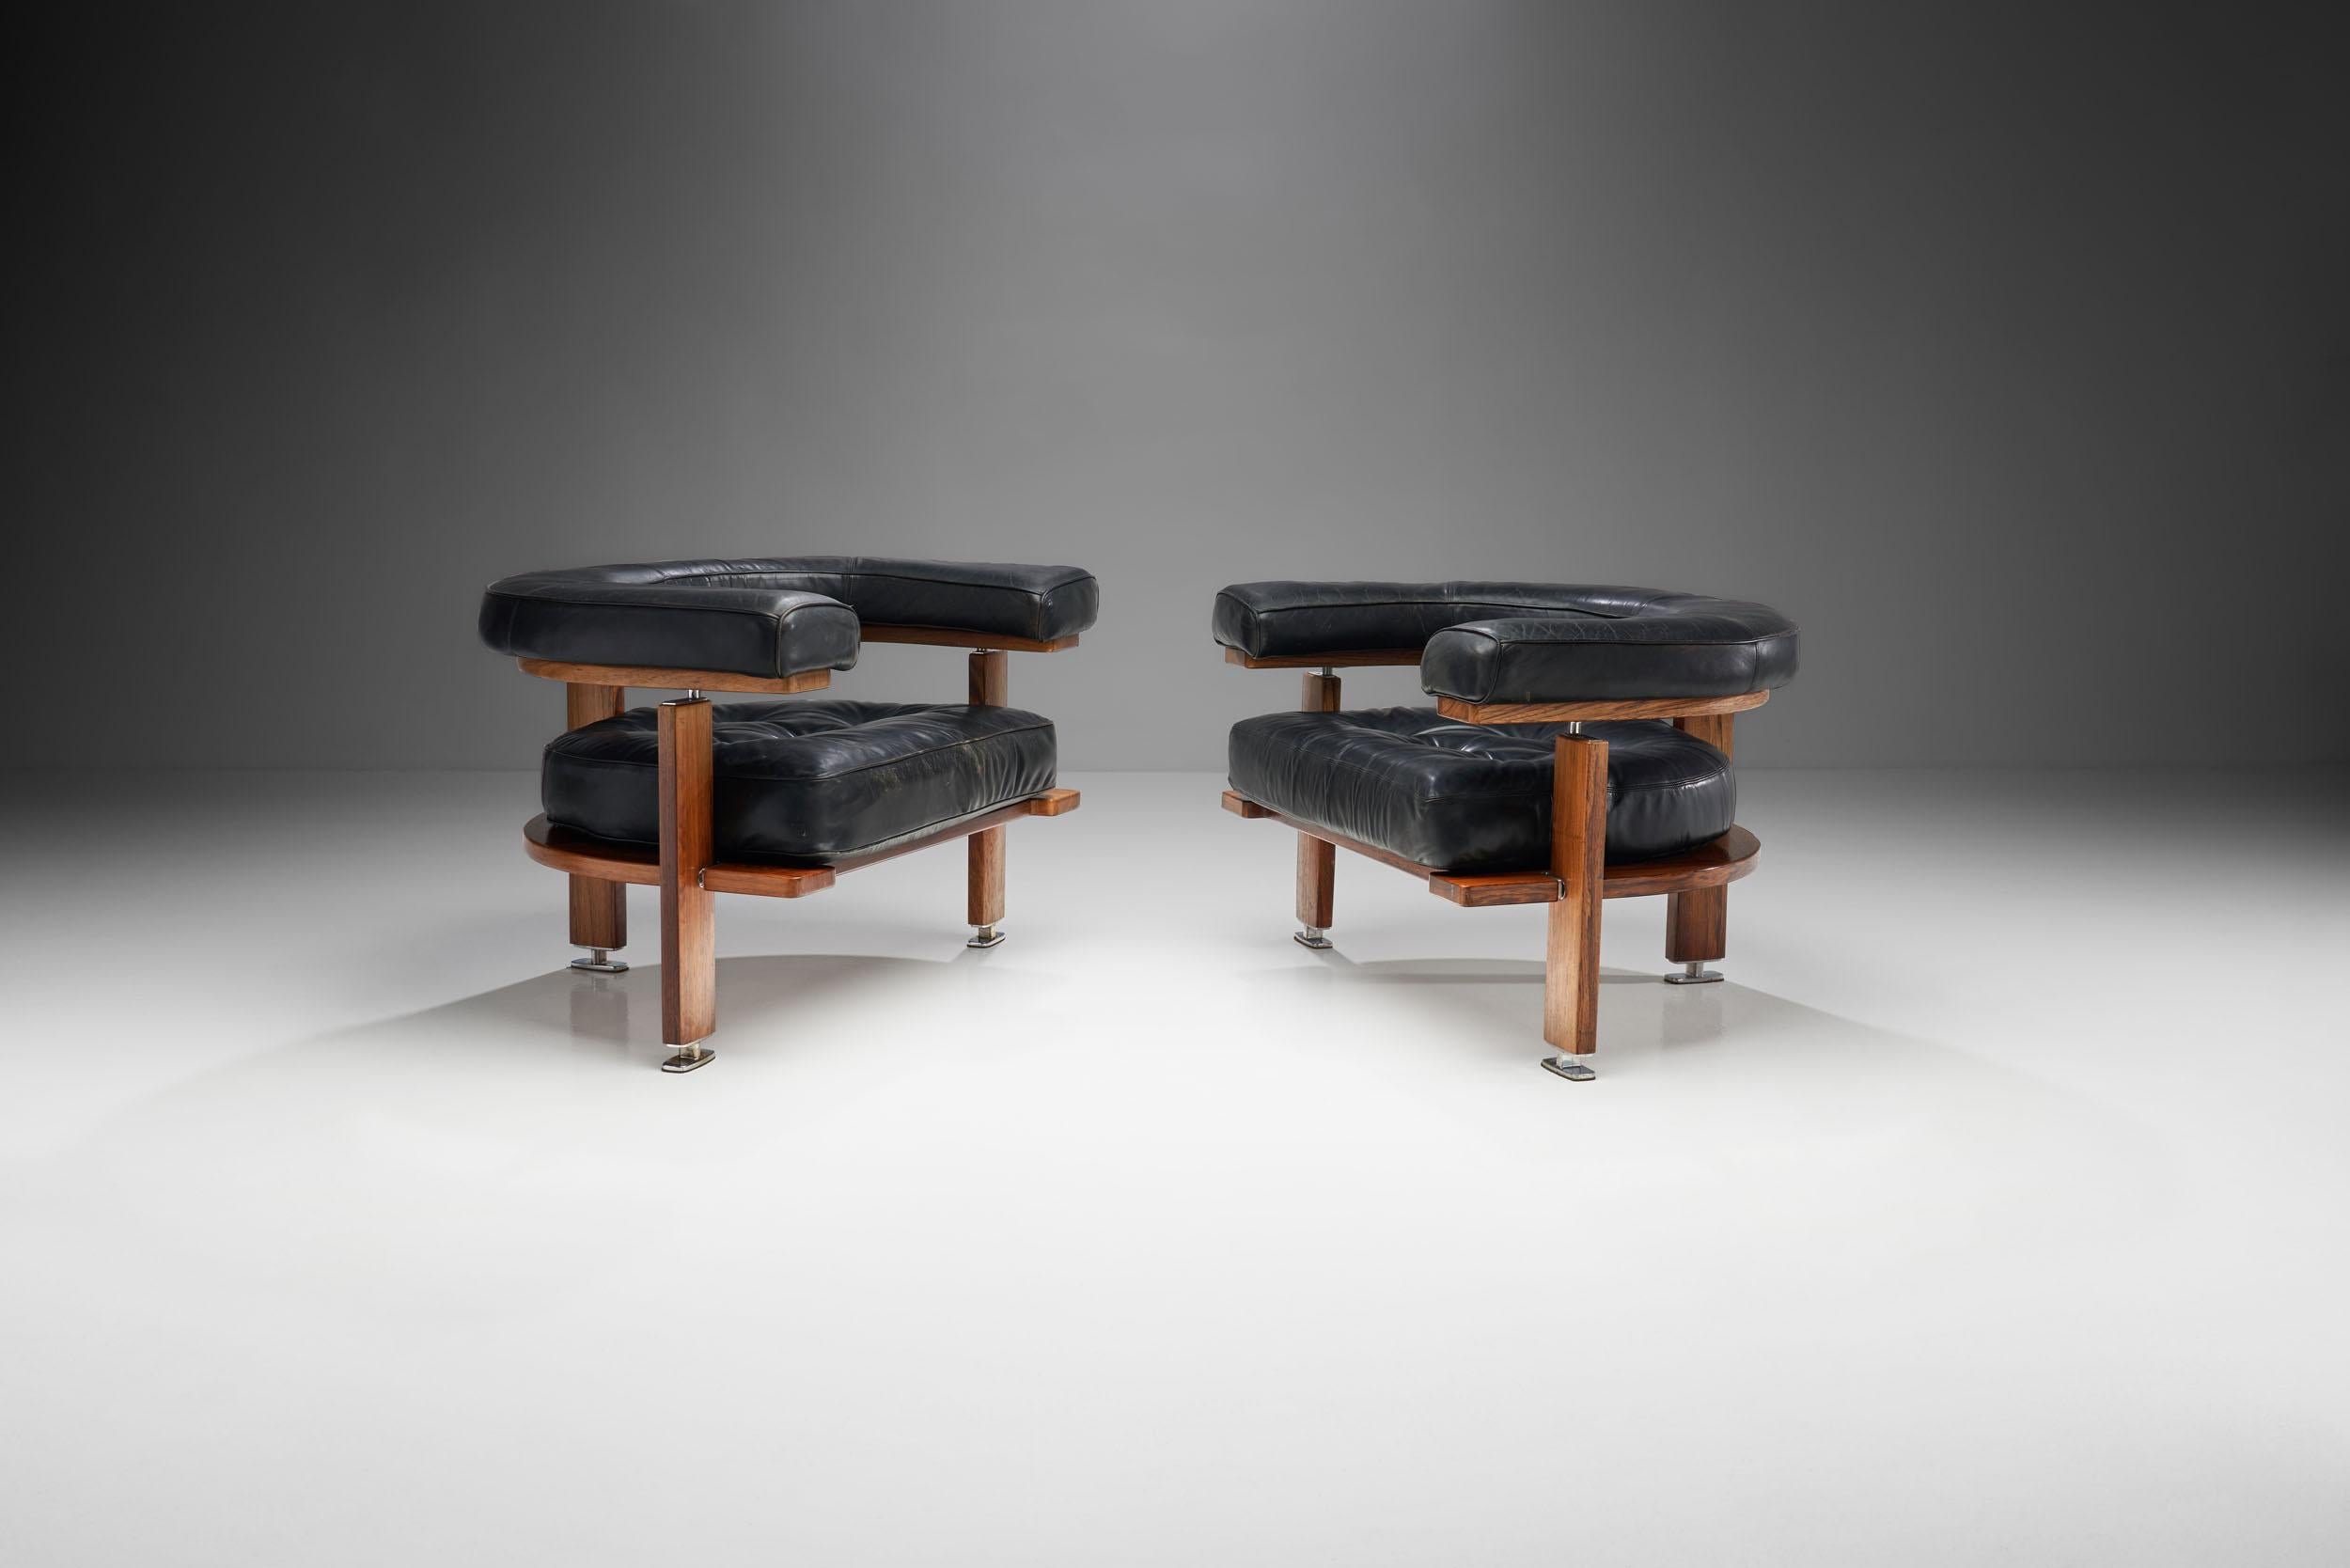 This pair of “Polar” lounge chairs was designed by the eminent Finnish designer, Esko Pajamies, and produced by Lahden Lepokalusto Oy Finland during the 1960s.

These leather chairs feature a half moon shaped backrest and comfortable,